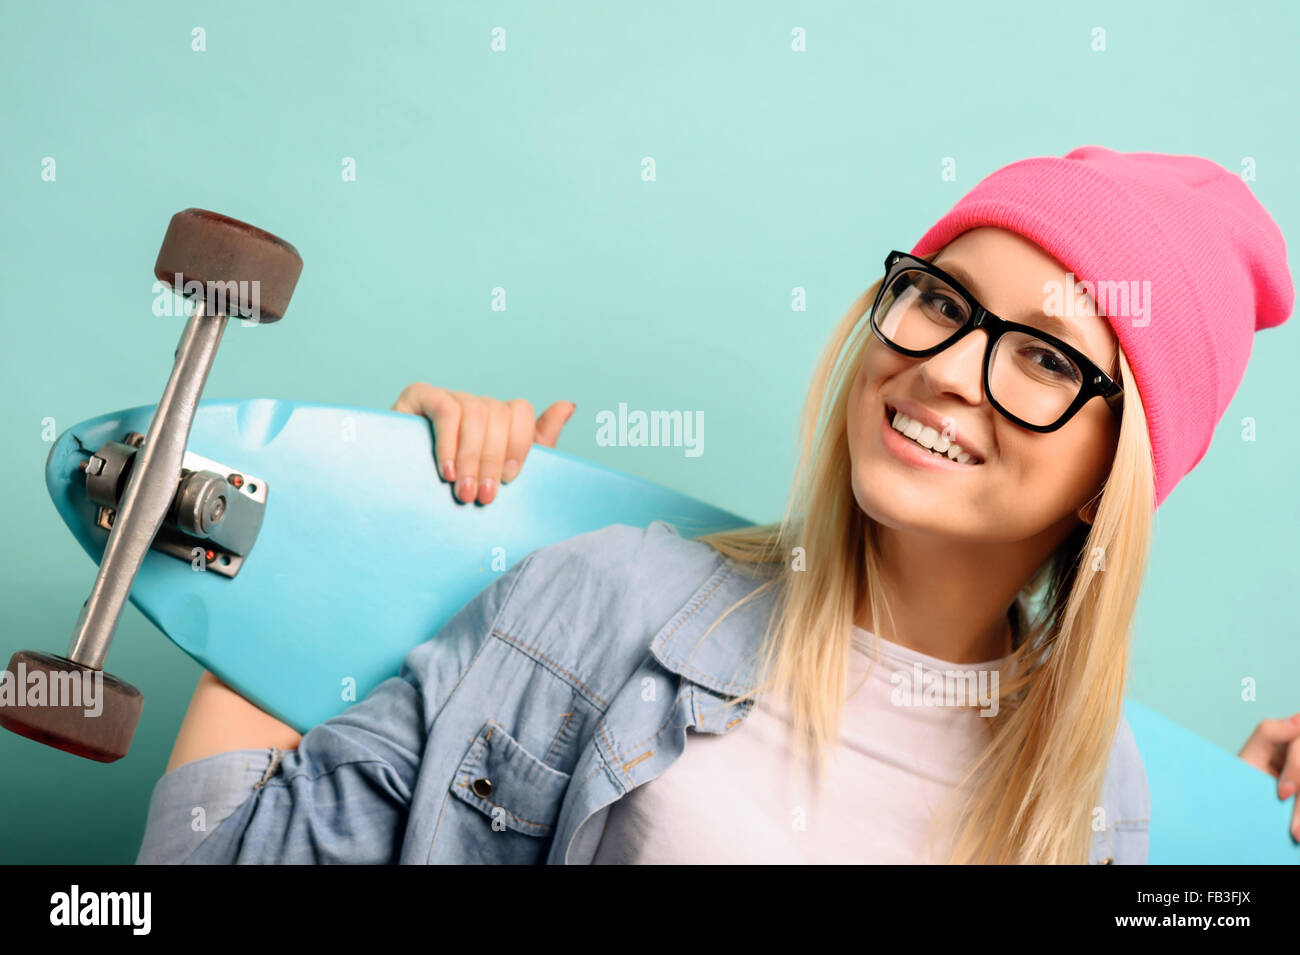 Cheerful Girl standing on blue background Banque D'Images